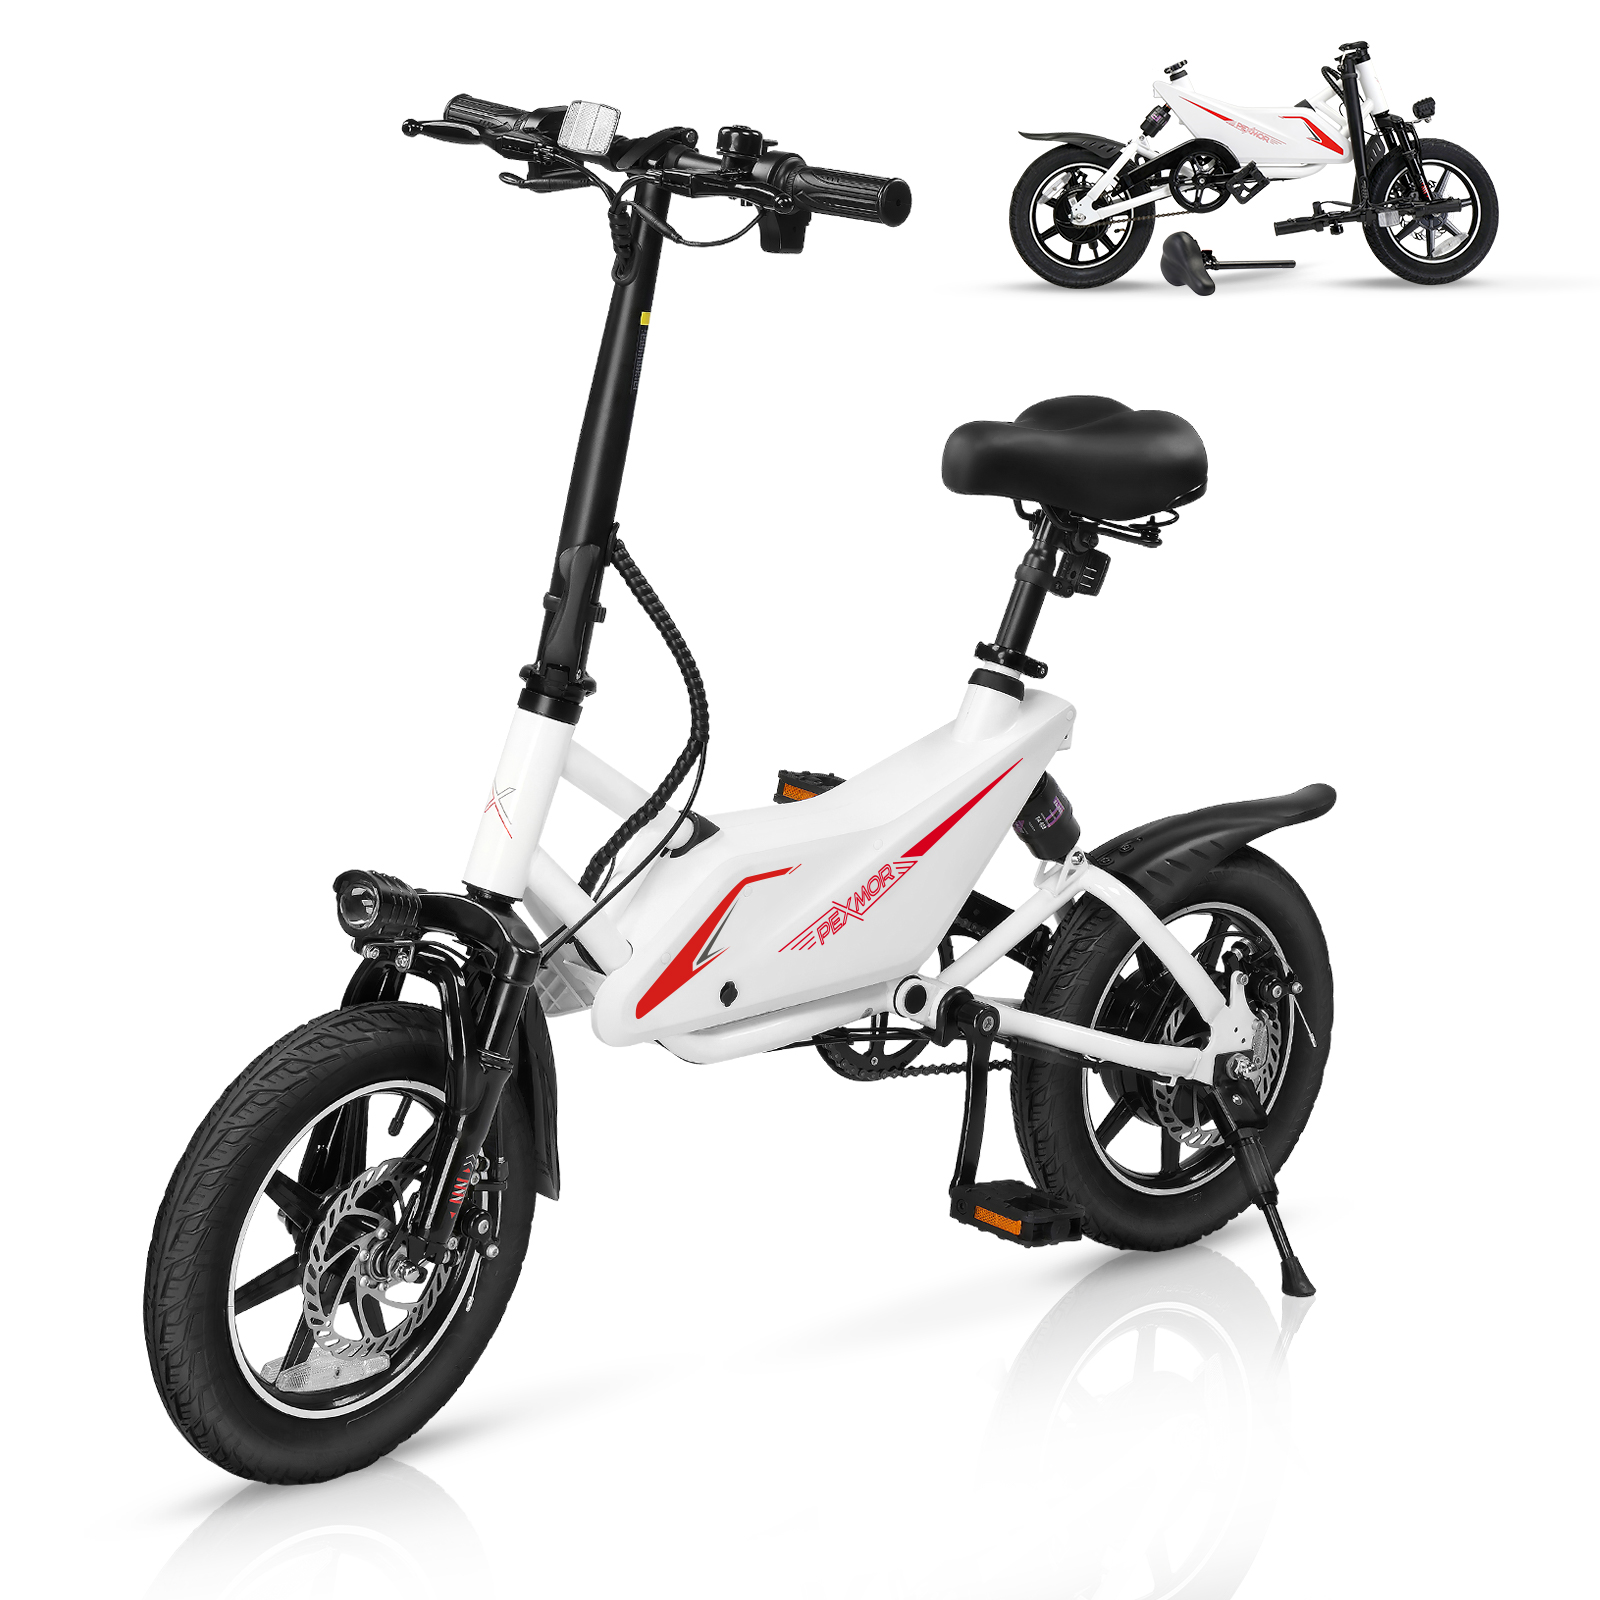 PEXMOR Electric Bike for Adults, Folding Electric Bicycle 350W 36V 6AH Battery w/Dual Shock Absorber&Dual Disc Brakes, 14" Foldable Commuter City Ebike for Adults/Teens,Throttle & Pedal Assist - image 1 of 9